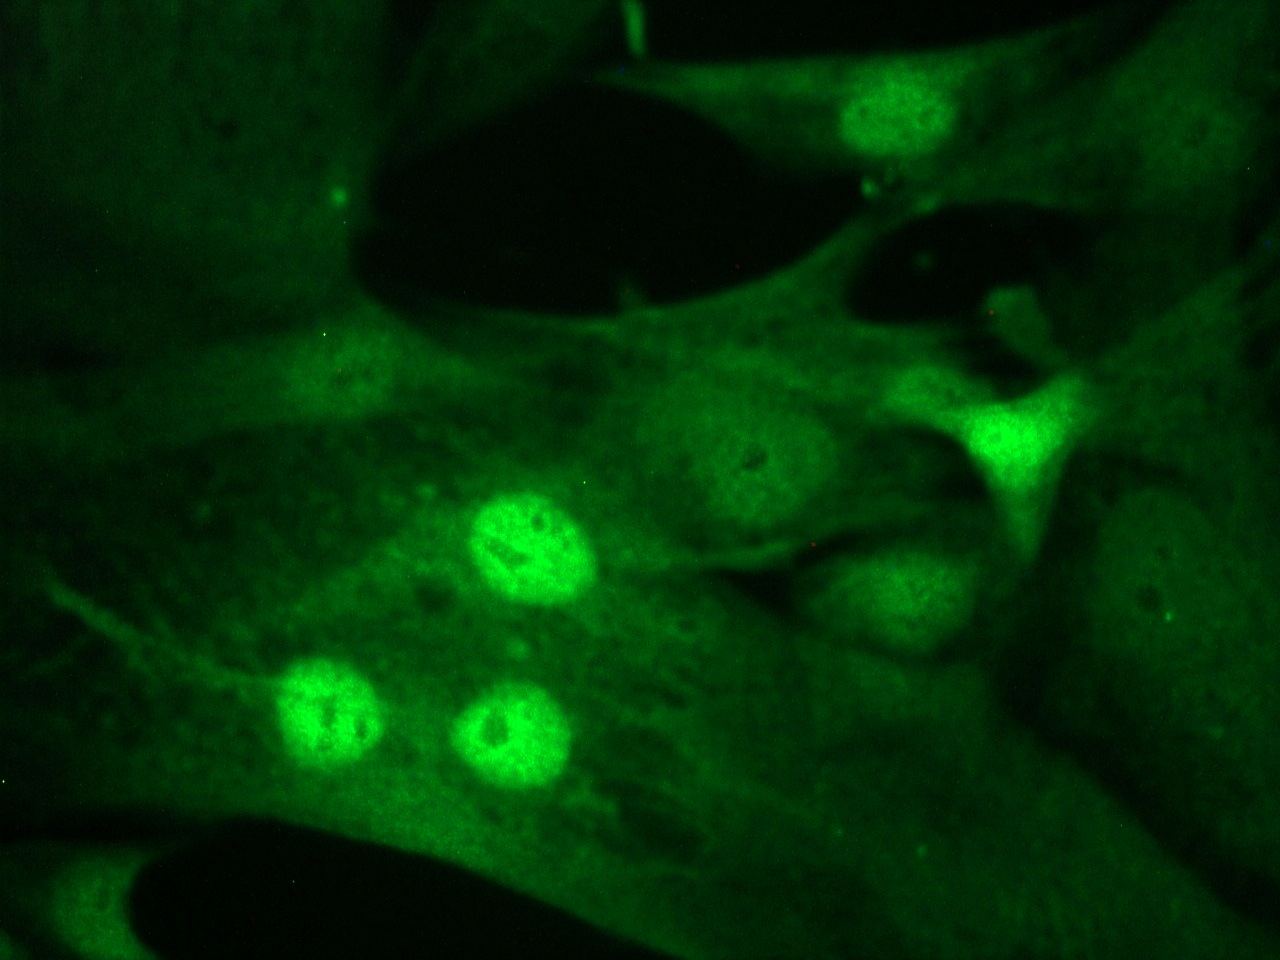 Figure 4. MyoD1 immunostaining of nuclei in MyoD1 transfected cells induced to undergo muscle cell differentiation.